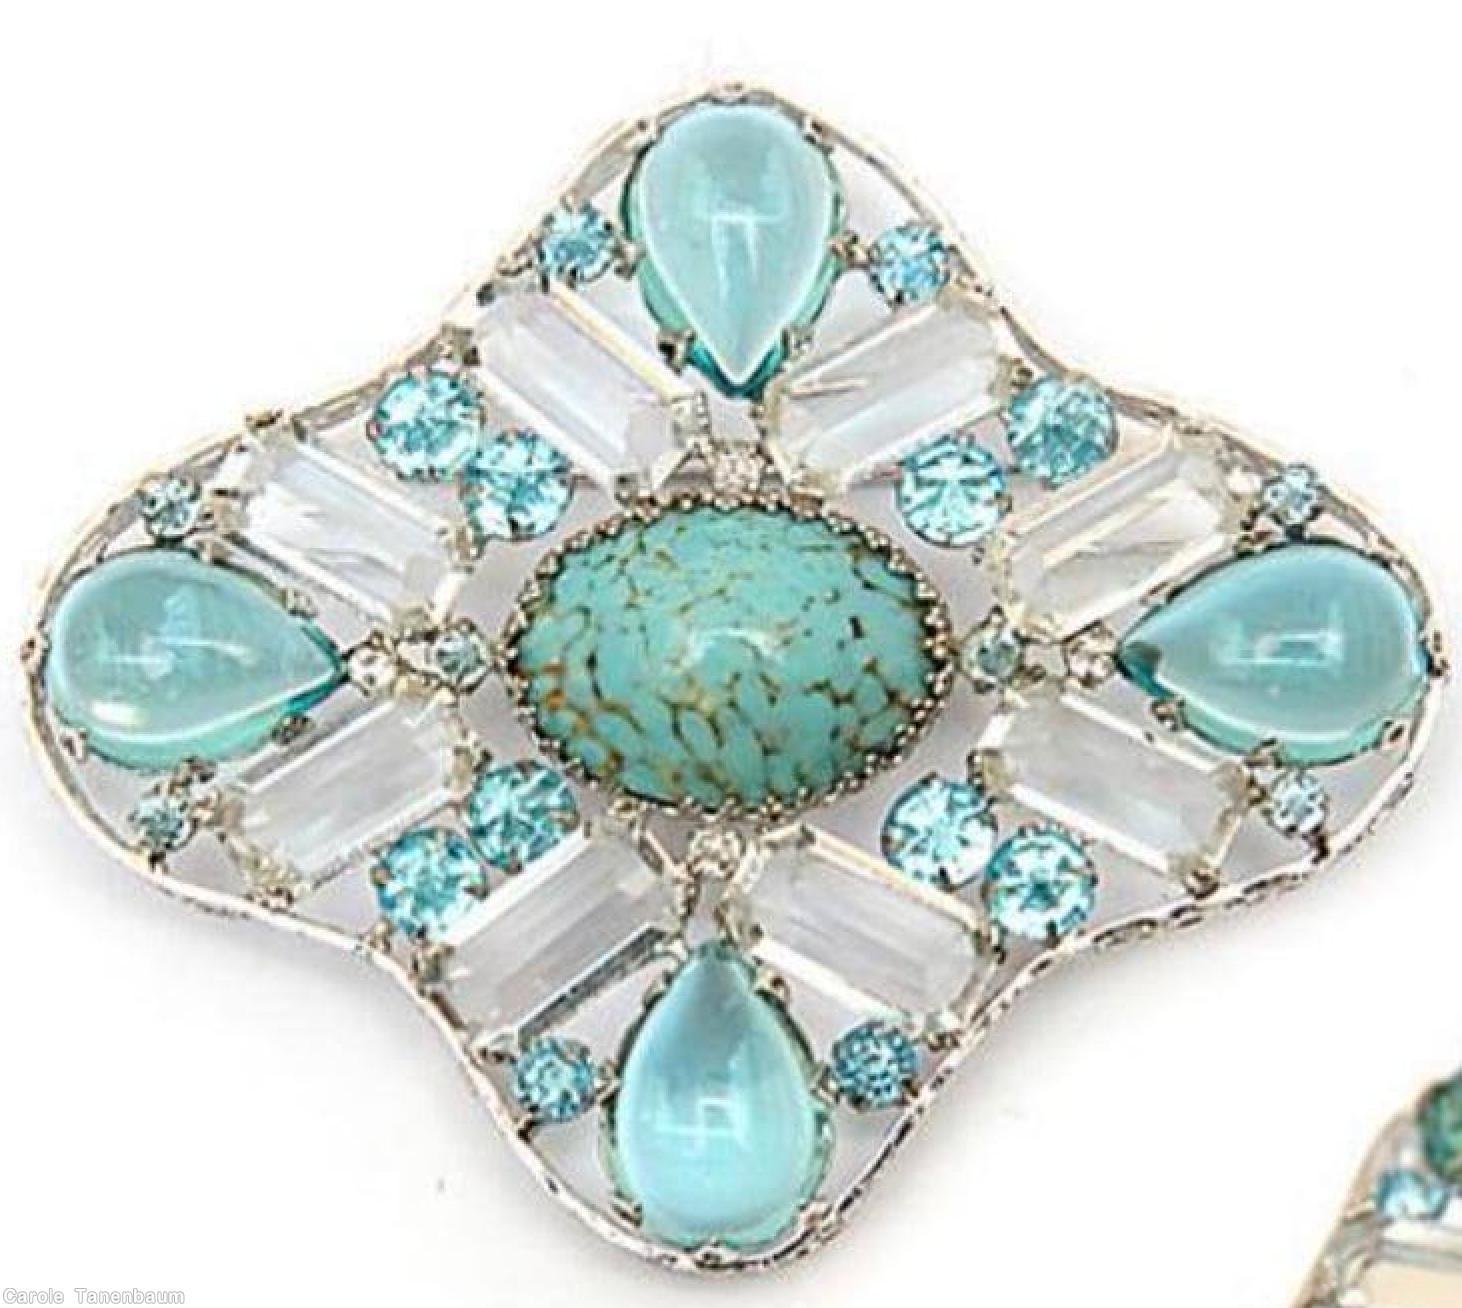 Schreiner maltese radial shadow box pin large oval cab center 8 rectangle 4 sided stone 4 large teardrop turquoise large oval center cab crystal 4 sided stone clear aqua jelly bean teardrop cab jewelry